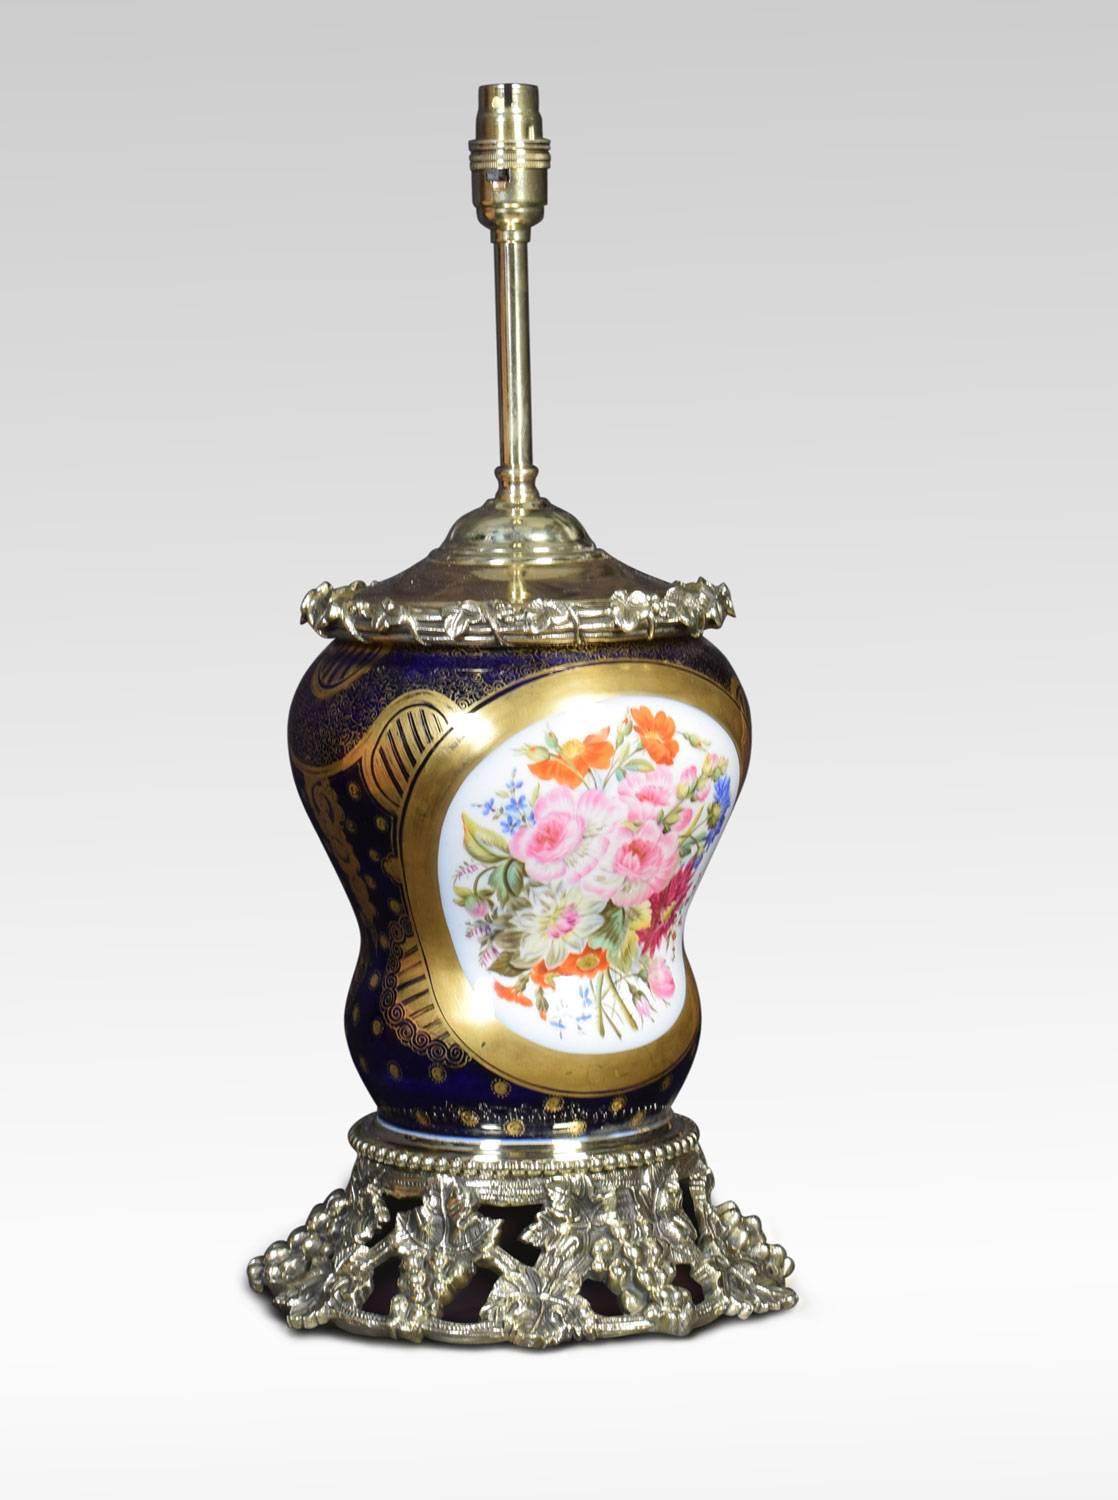 Sevres style table lamp, in cobalt blue with gold detail. The gilt bronze rim above central hand painted panel depicting maiden in typical dress the opposing side with floral motifs. Raised up on gilt bronze foliated base. (The lamp has been